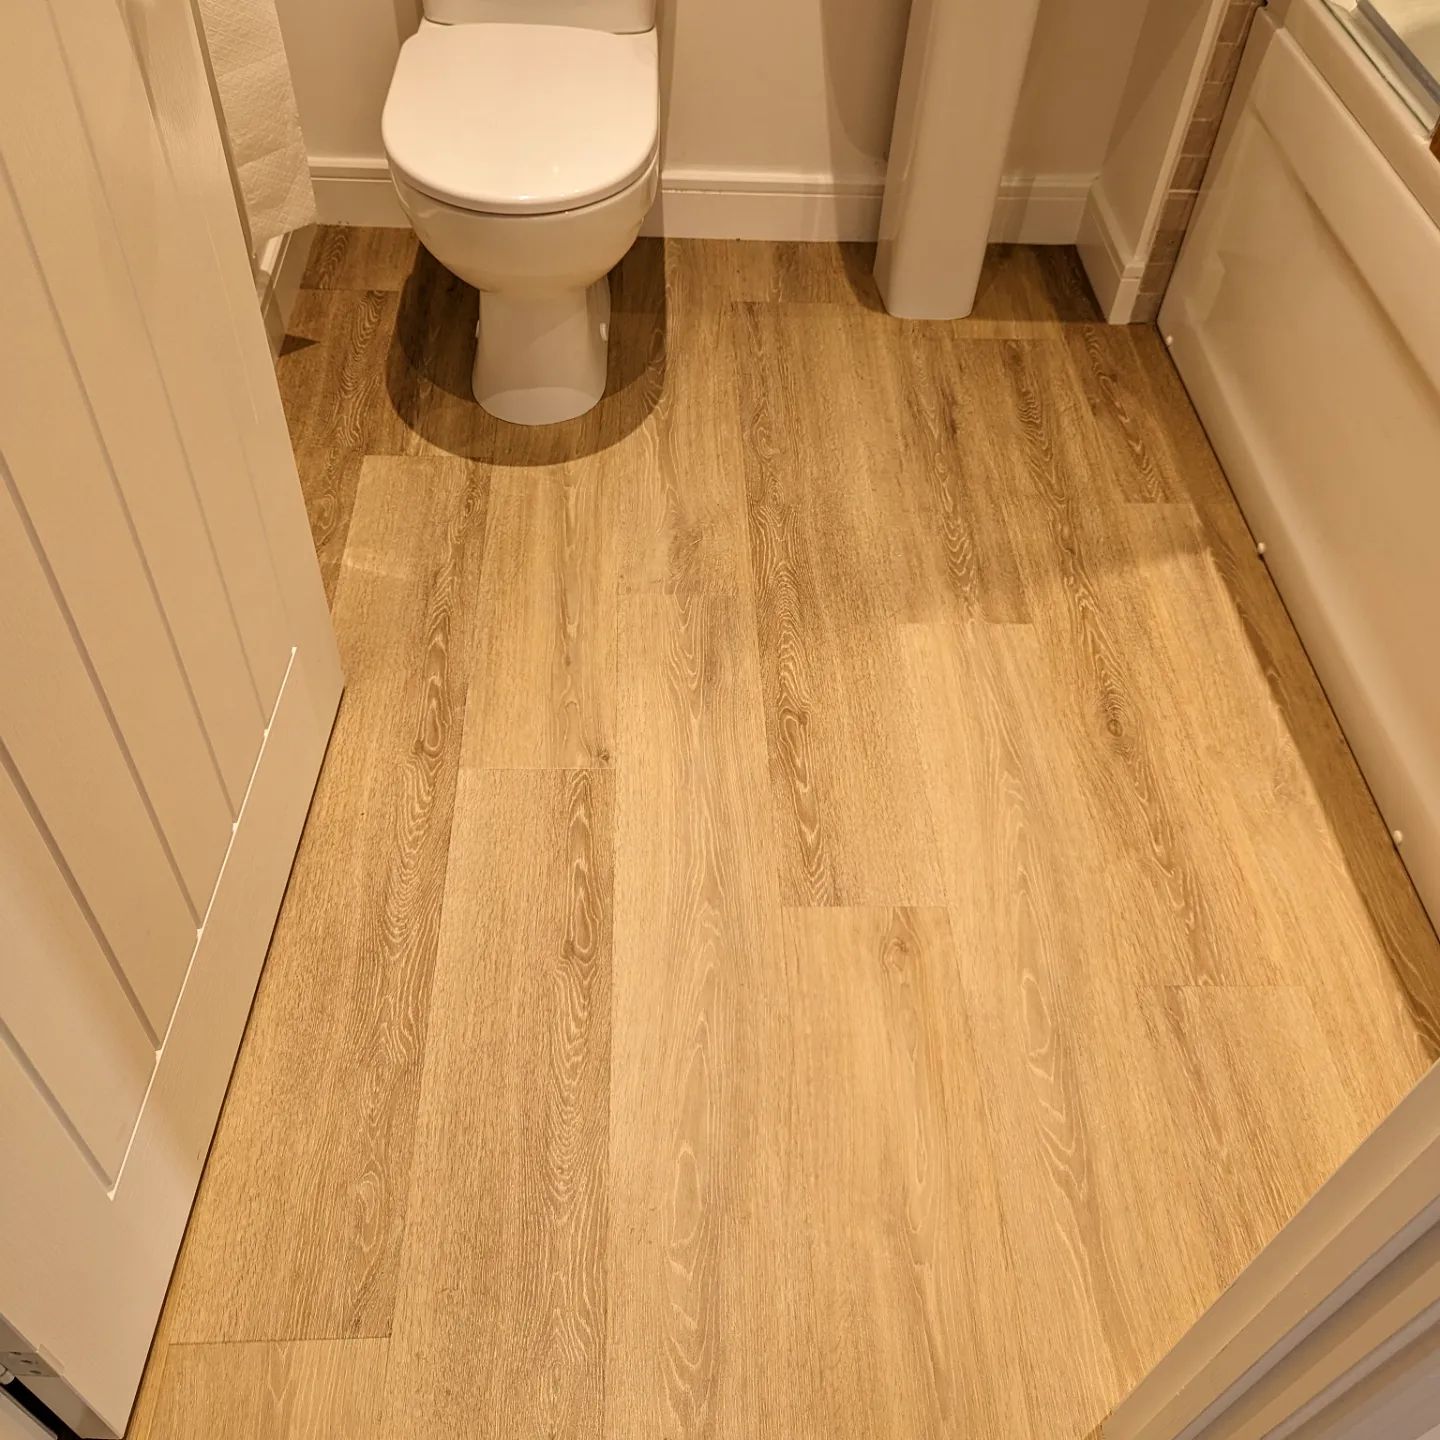 What are the Benefits of LVT Flooring?